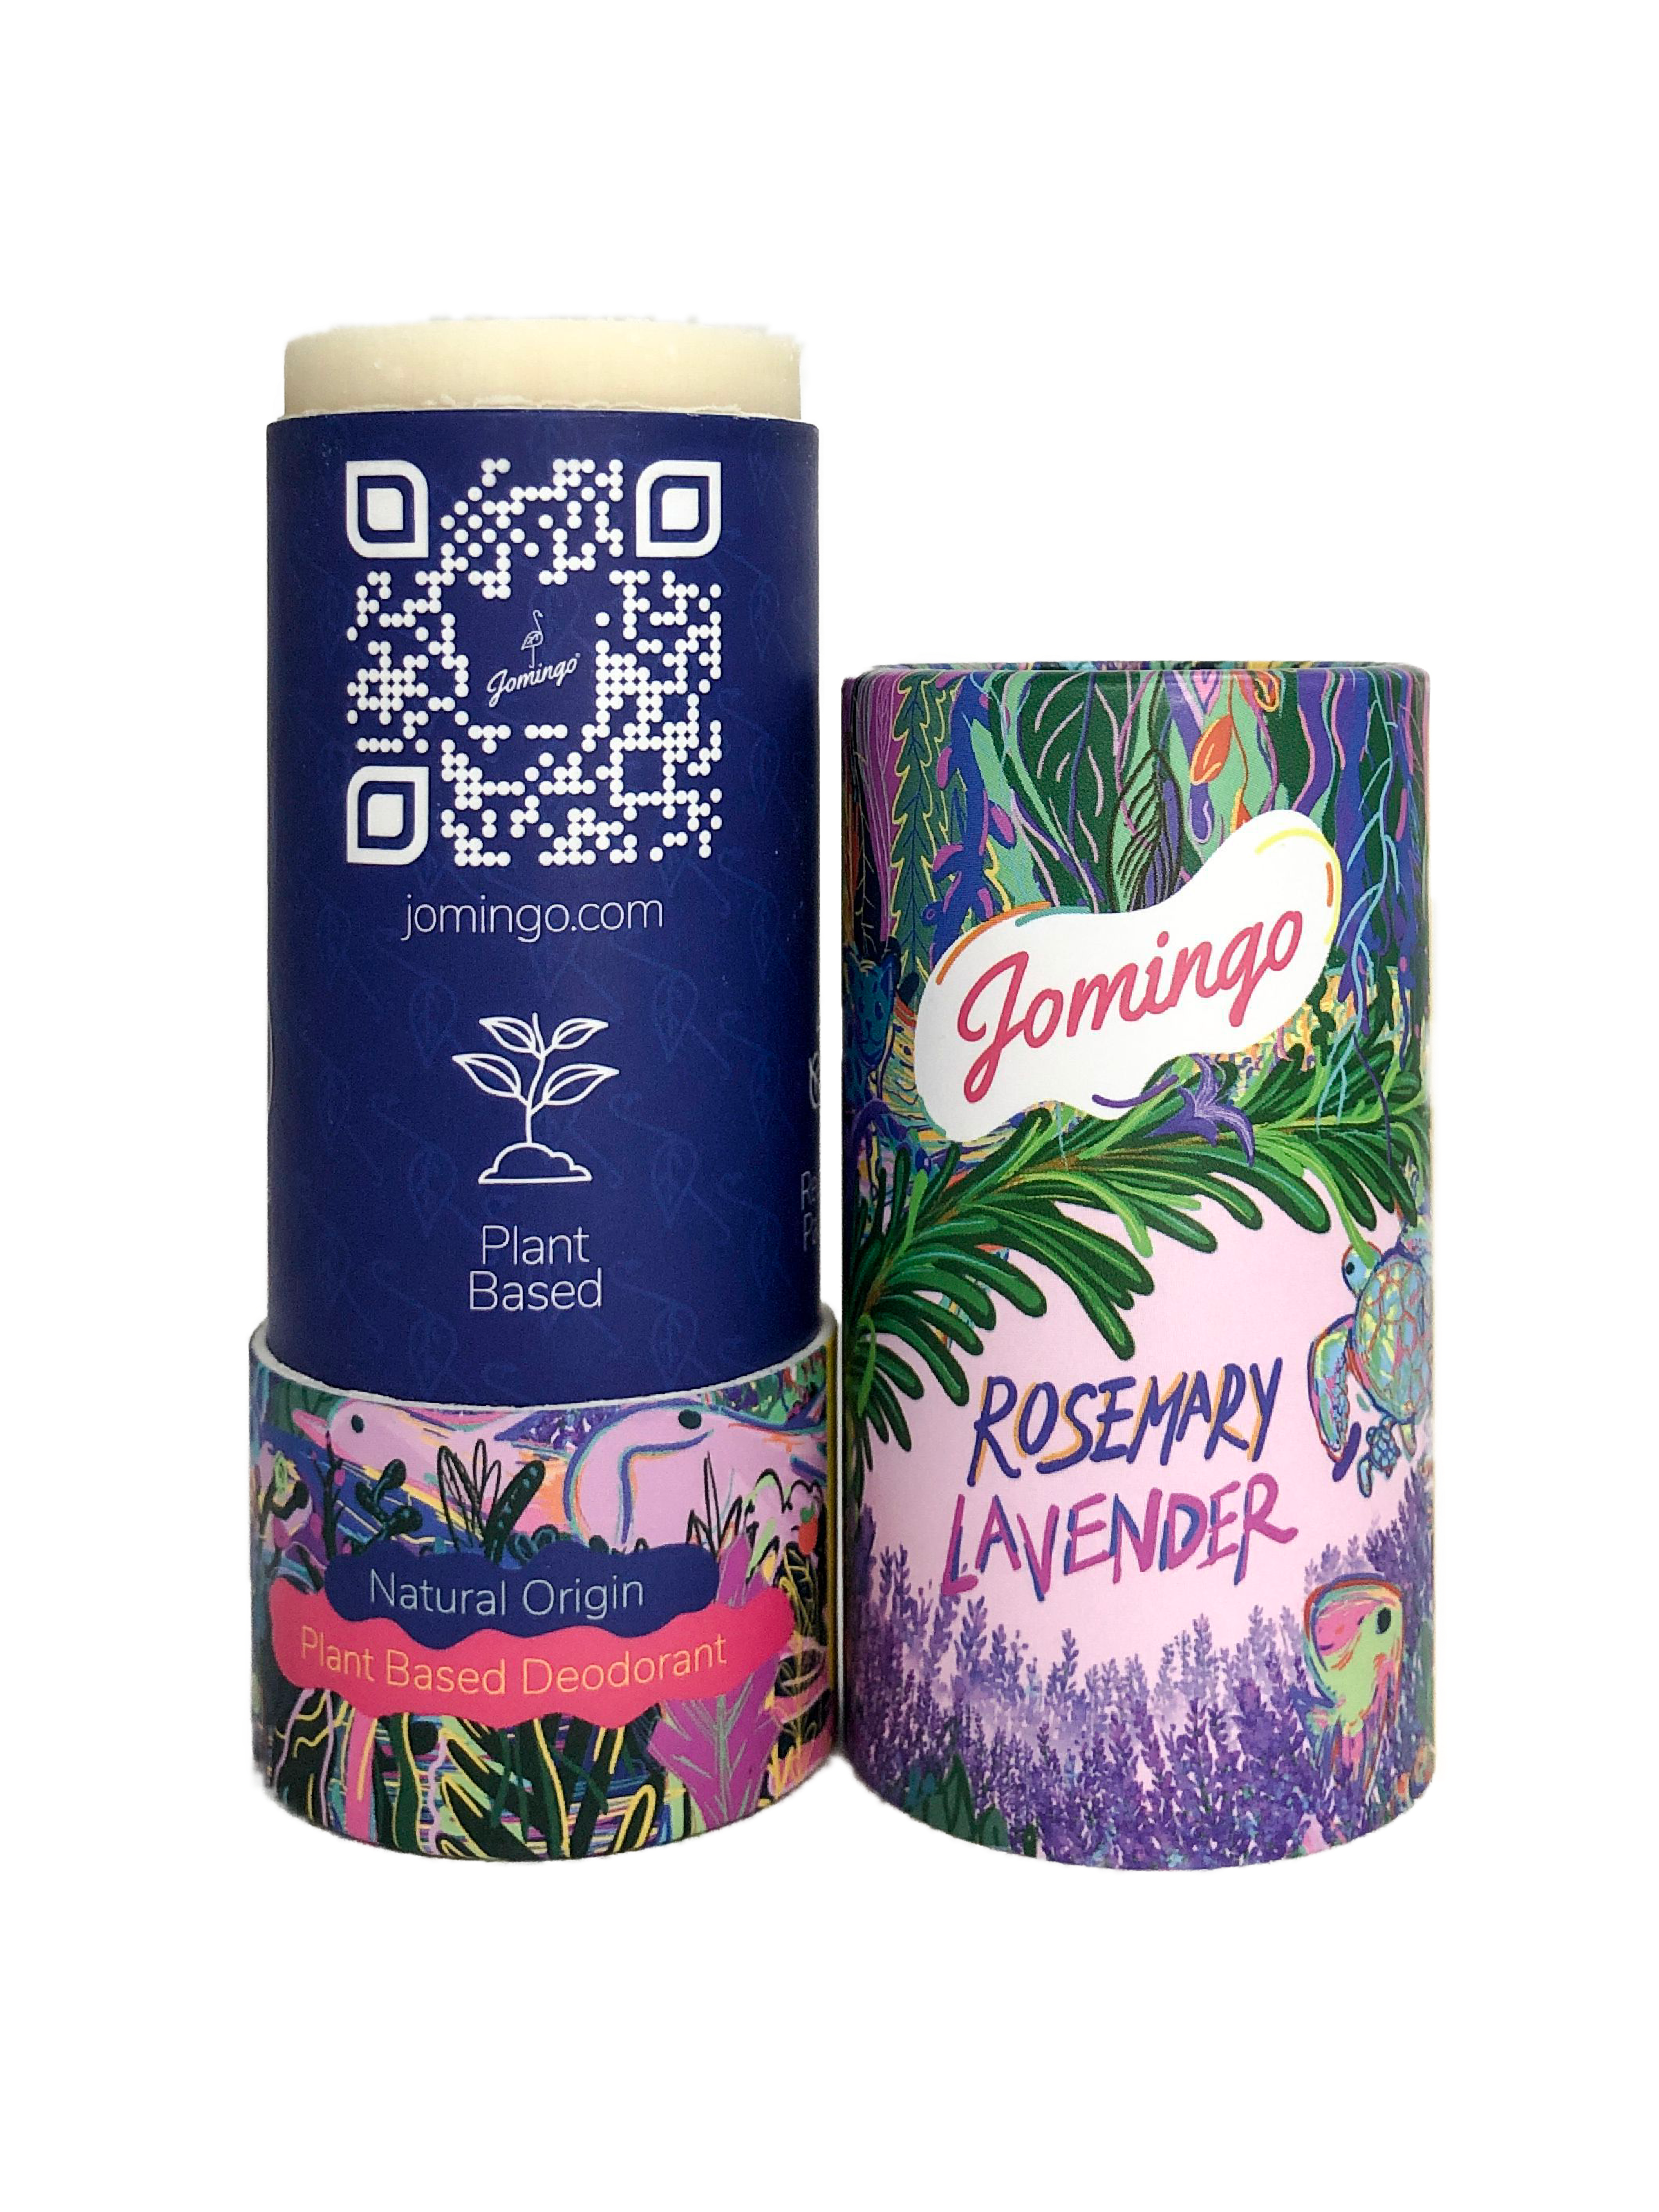 NEW! Certified Natural, Aluminium Free  & Plant Based Deodorant Stick For Men, Women and Kids - Rosemary Lavender 50g